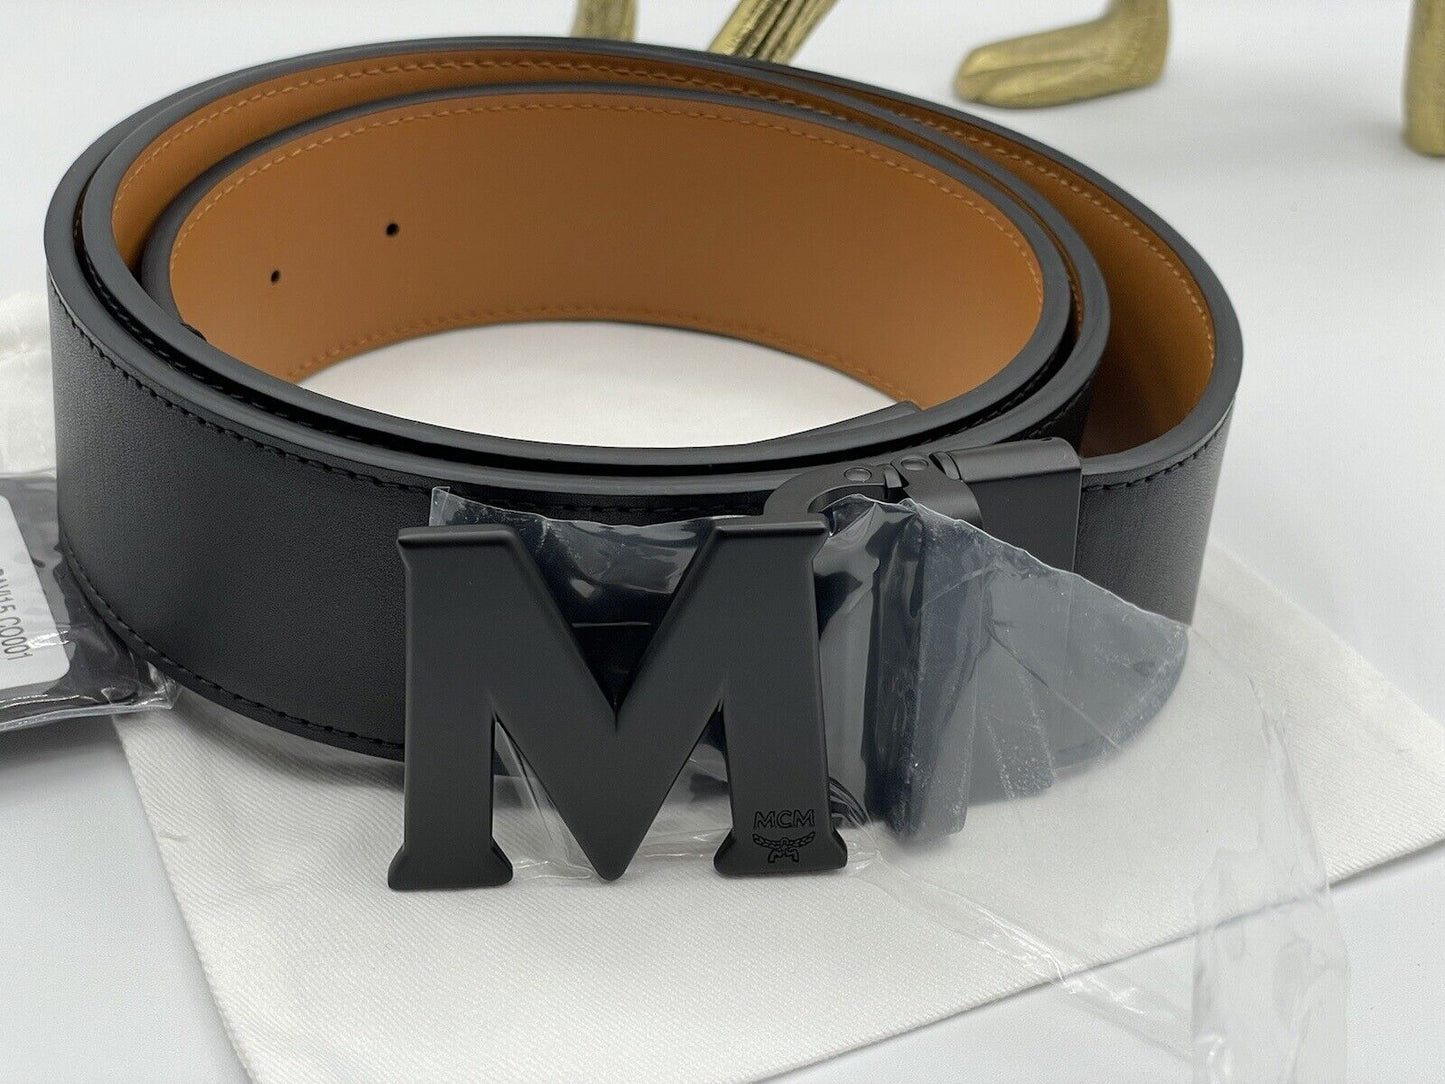 HOT! NWT AUTHENTIC MCM Matte Black MENS Women's BELT WITH A Dust BAG One Size